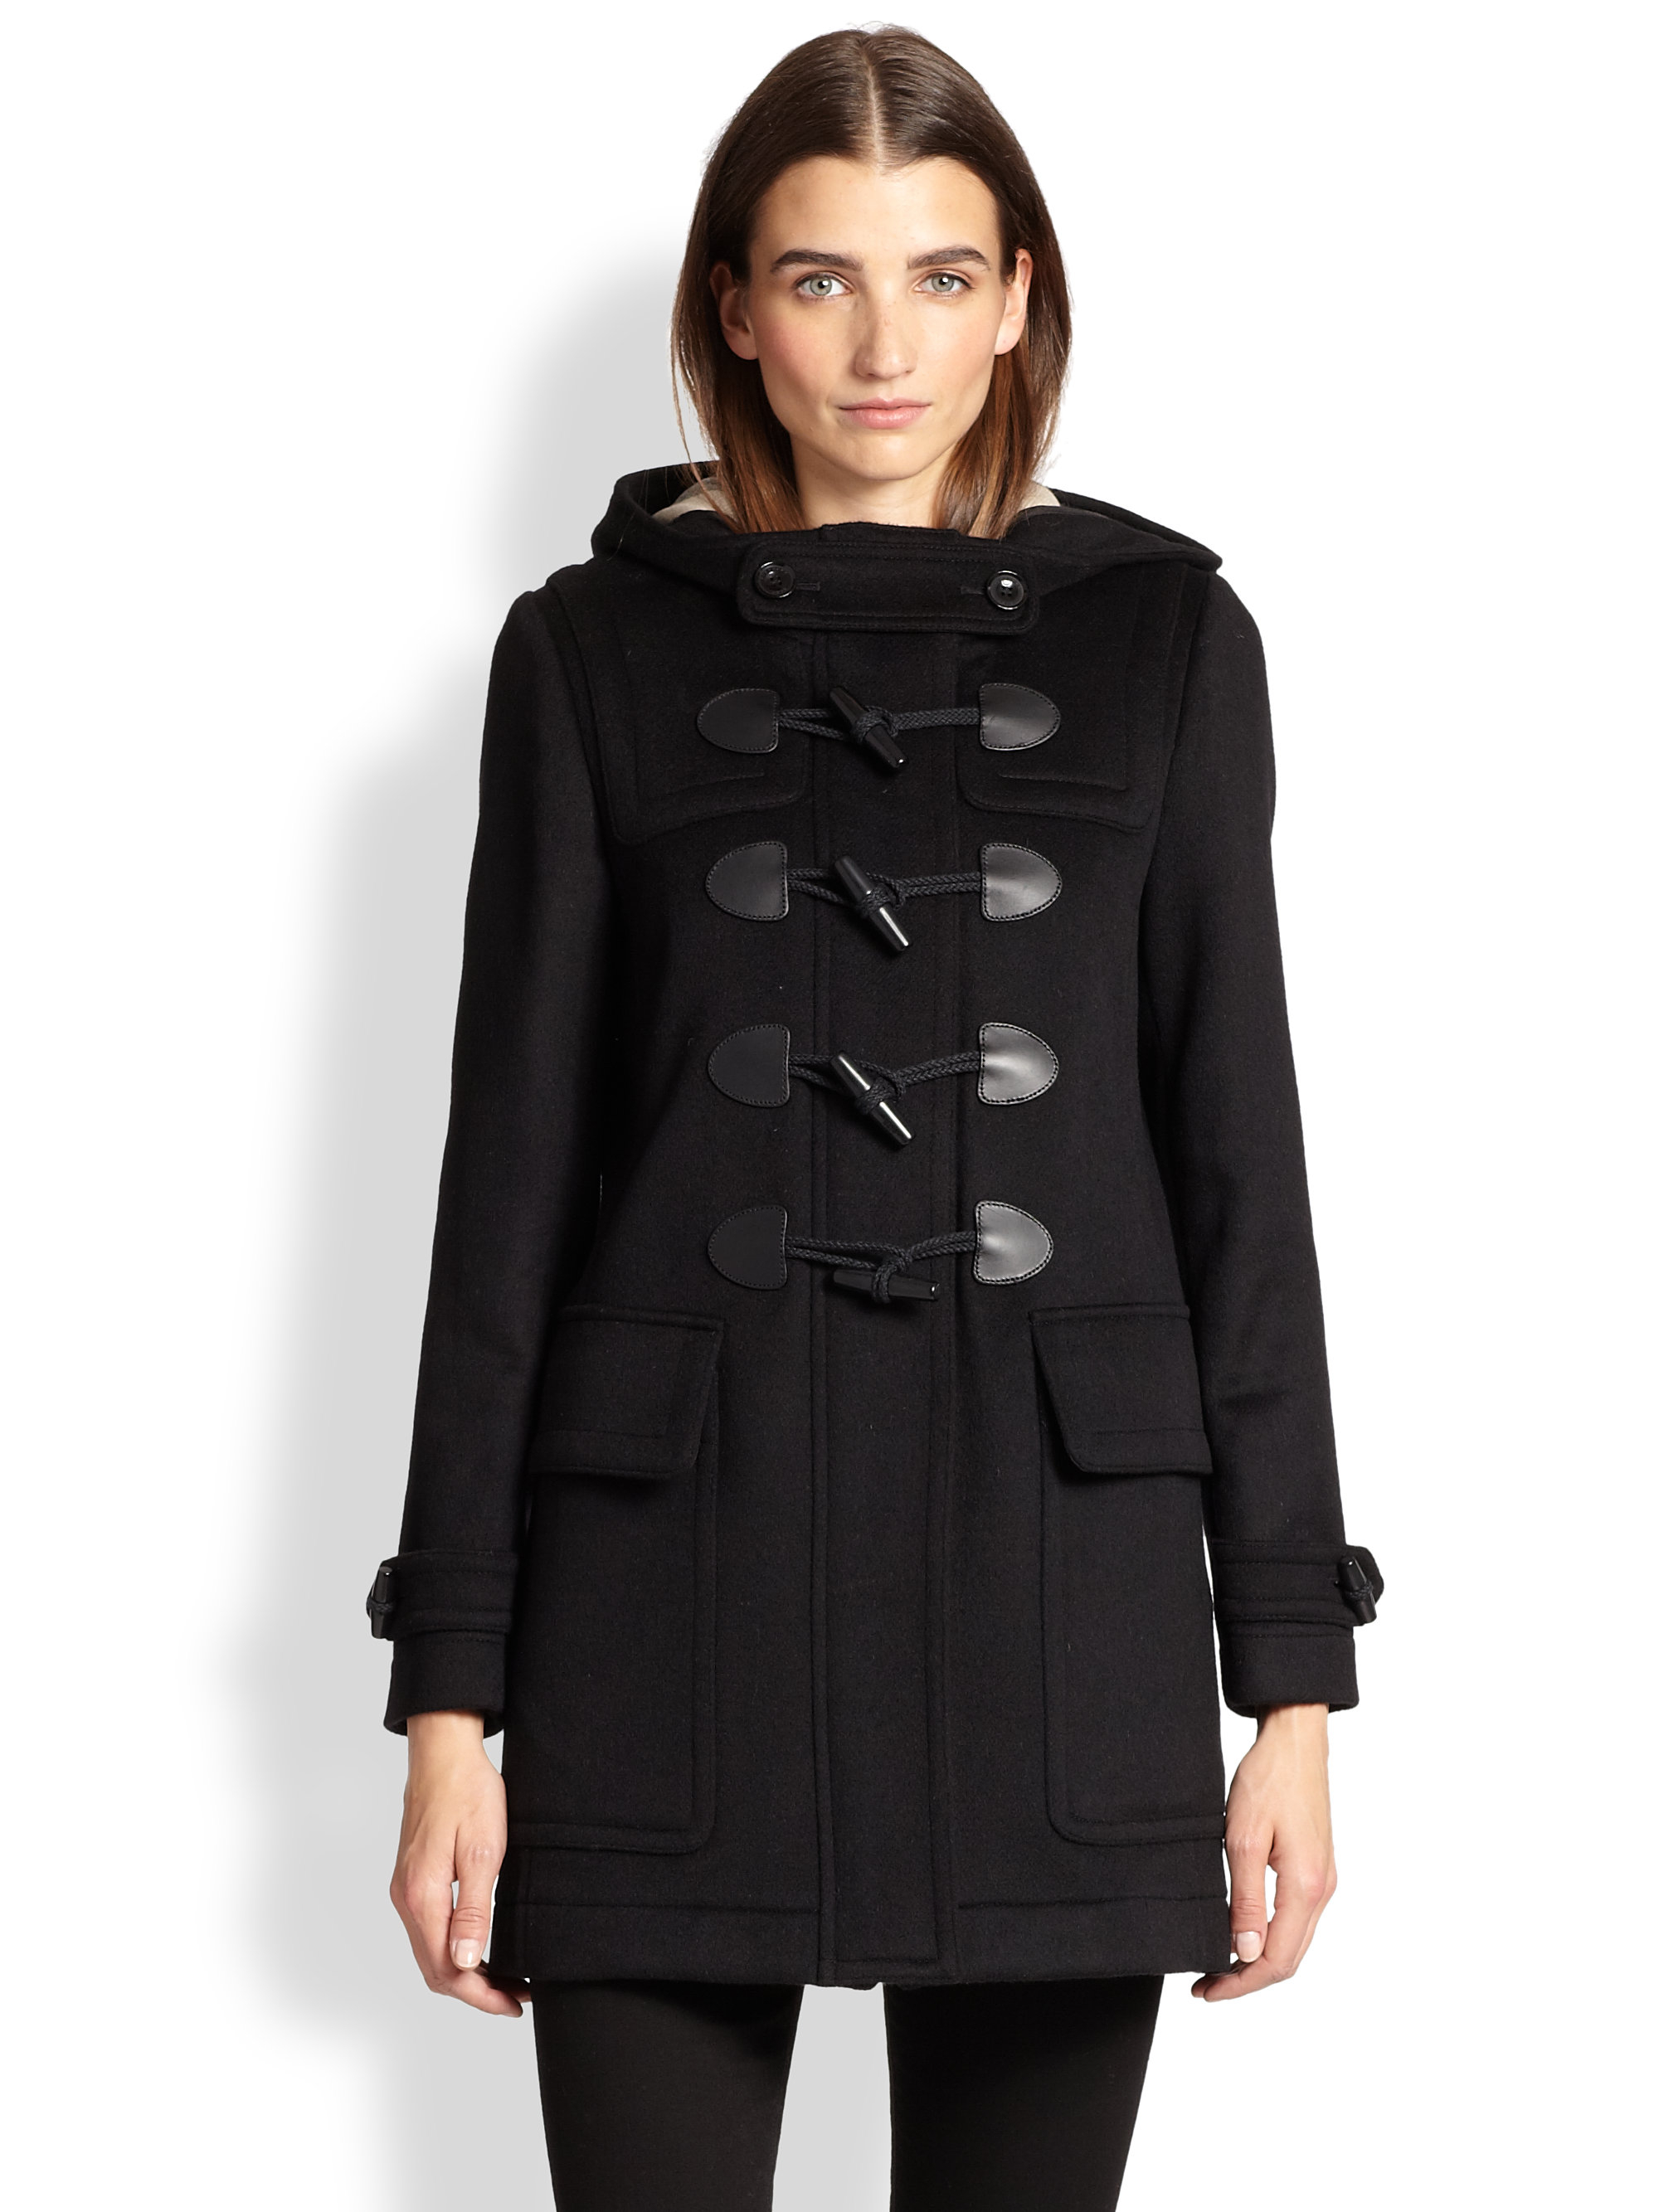 Lyst - Burberry Finsdale Wool Toggle Coat in Black